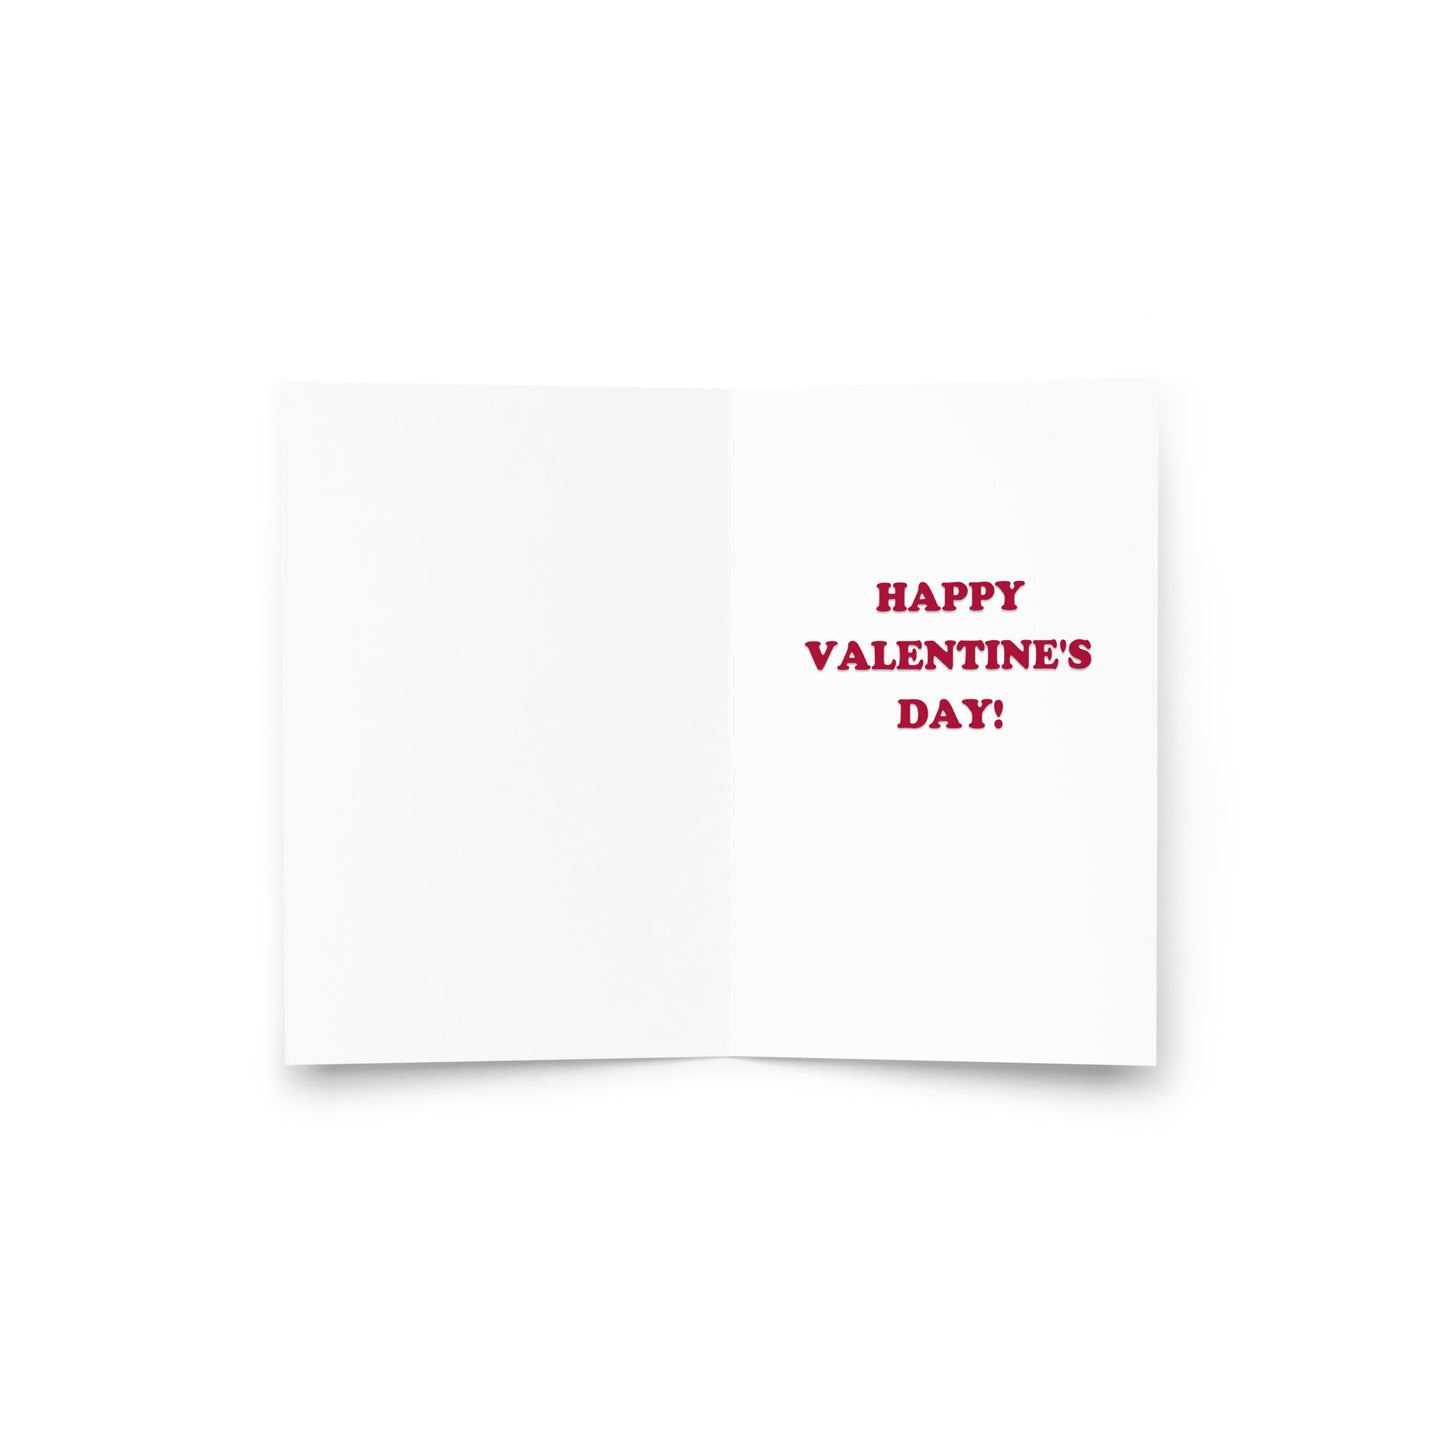 Here's The Deal Joe Biden Funny Valentine's Day Card